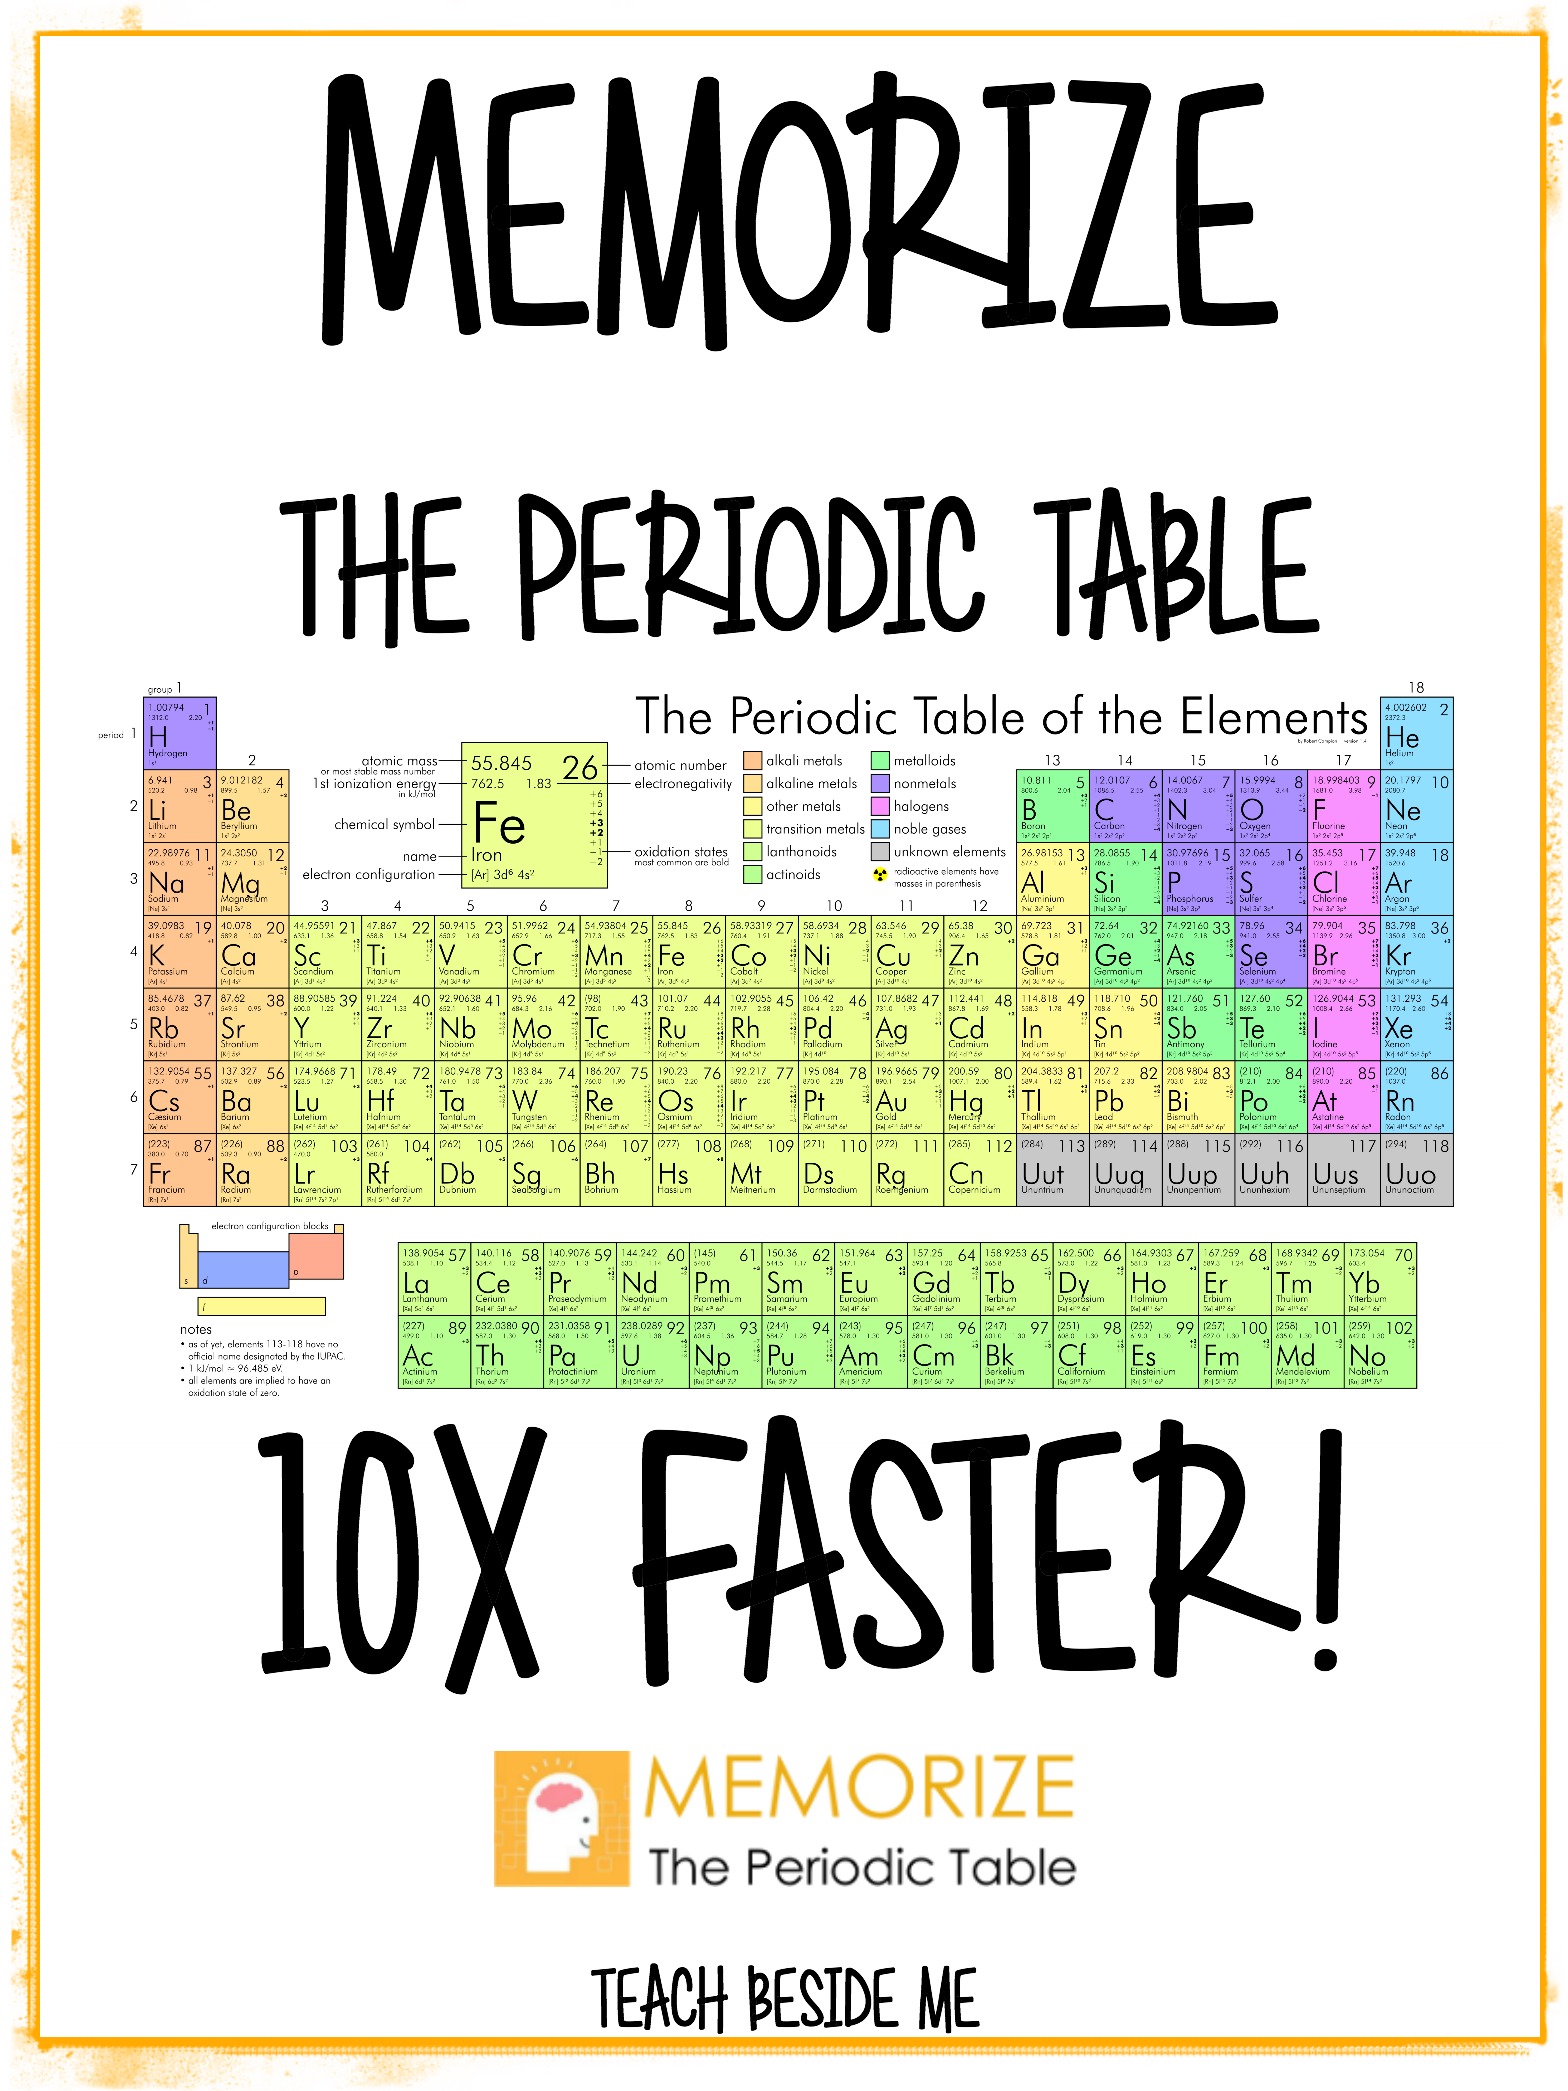 Memorize the Periodic Table 10x Faster! text with background image of a colored periodic table